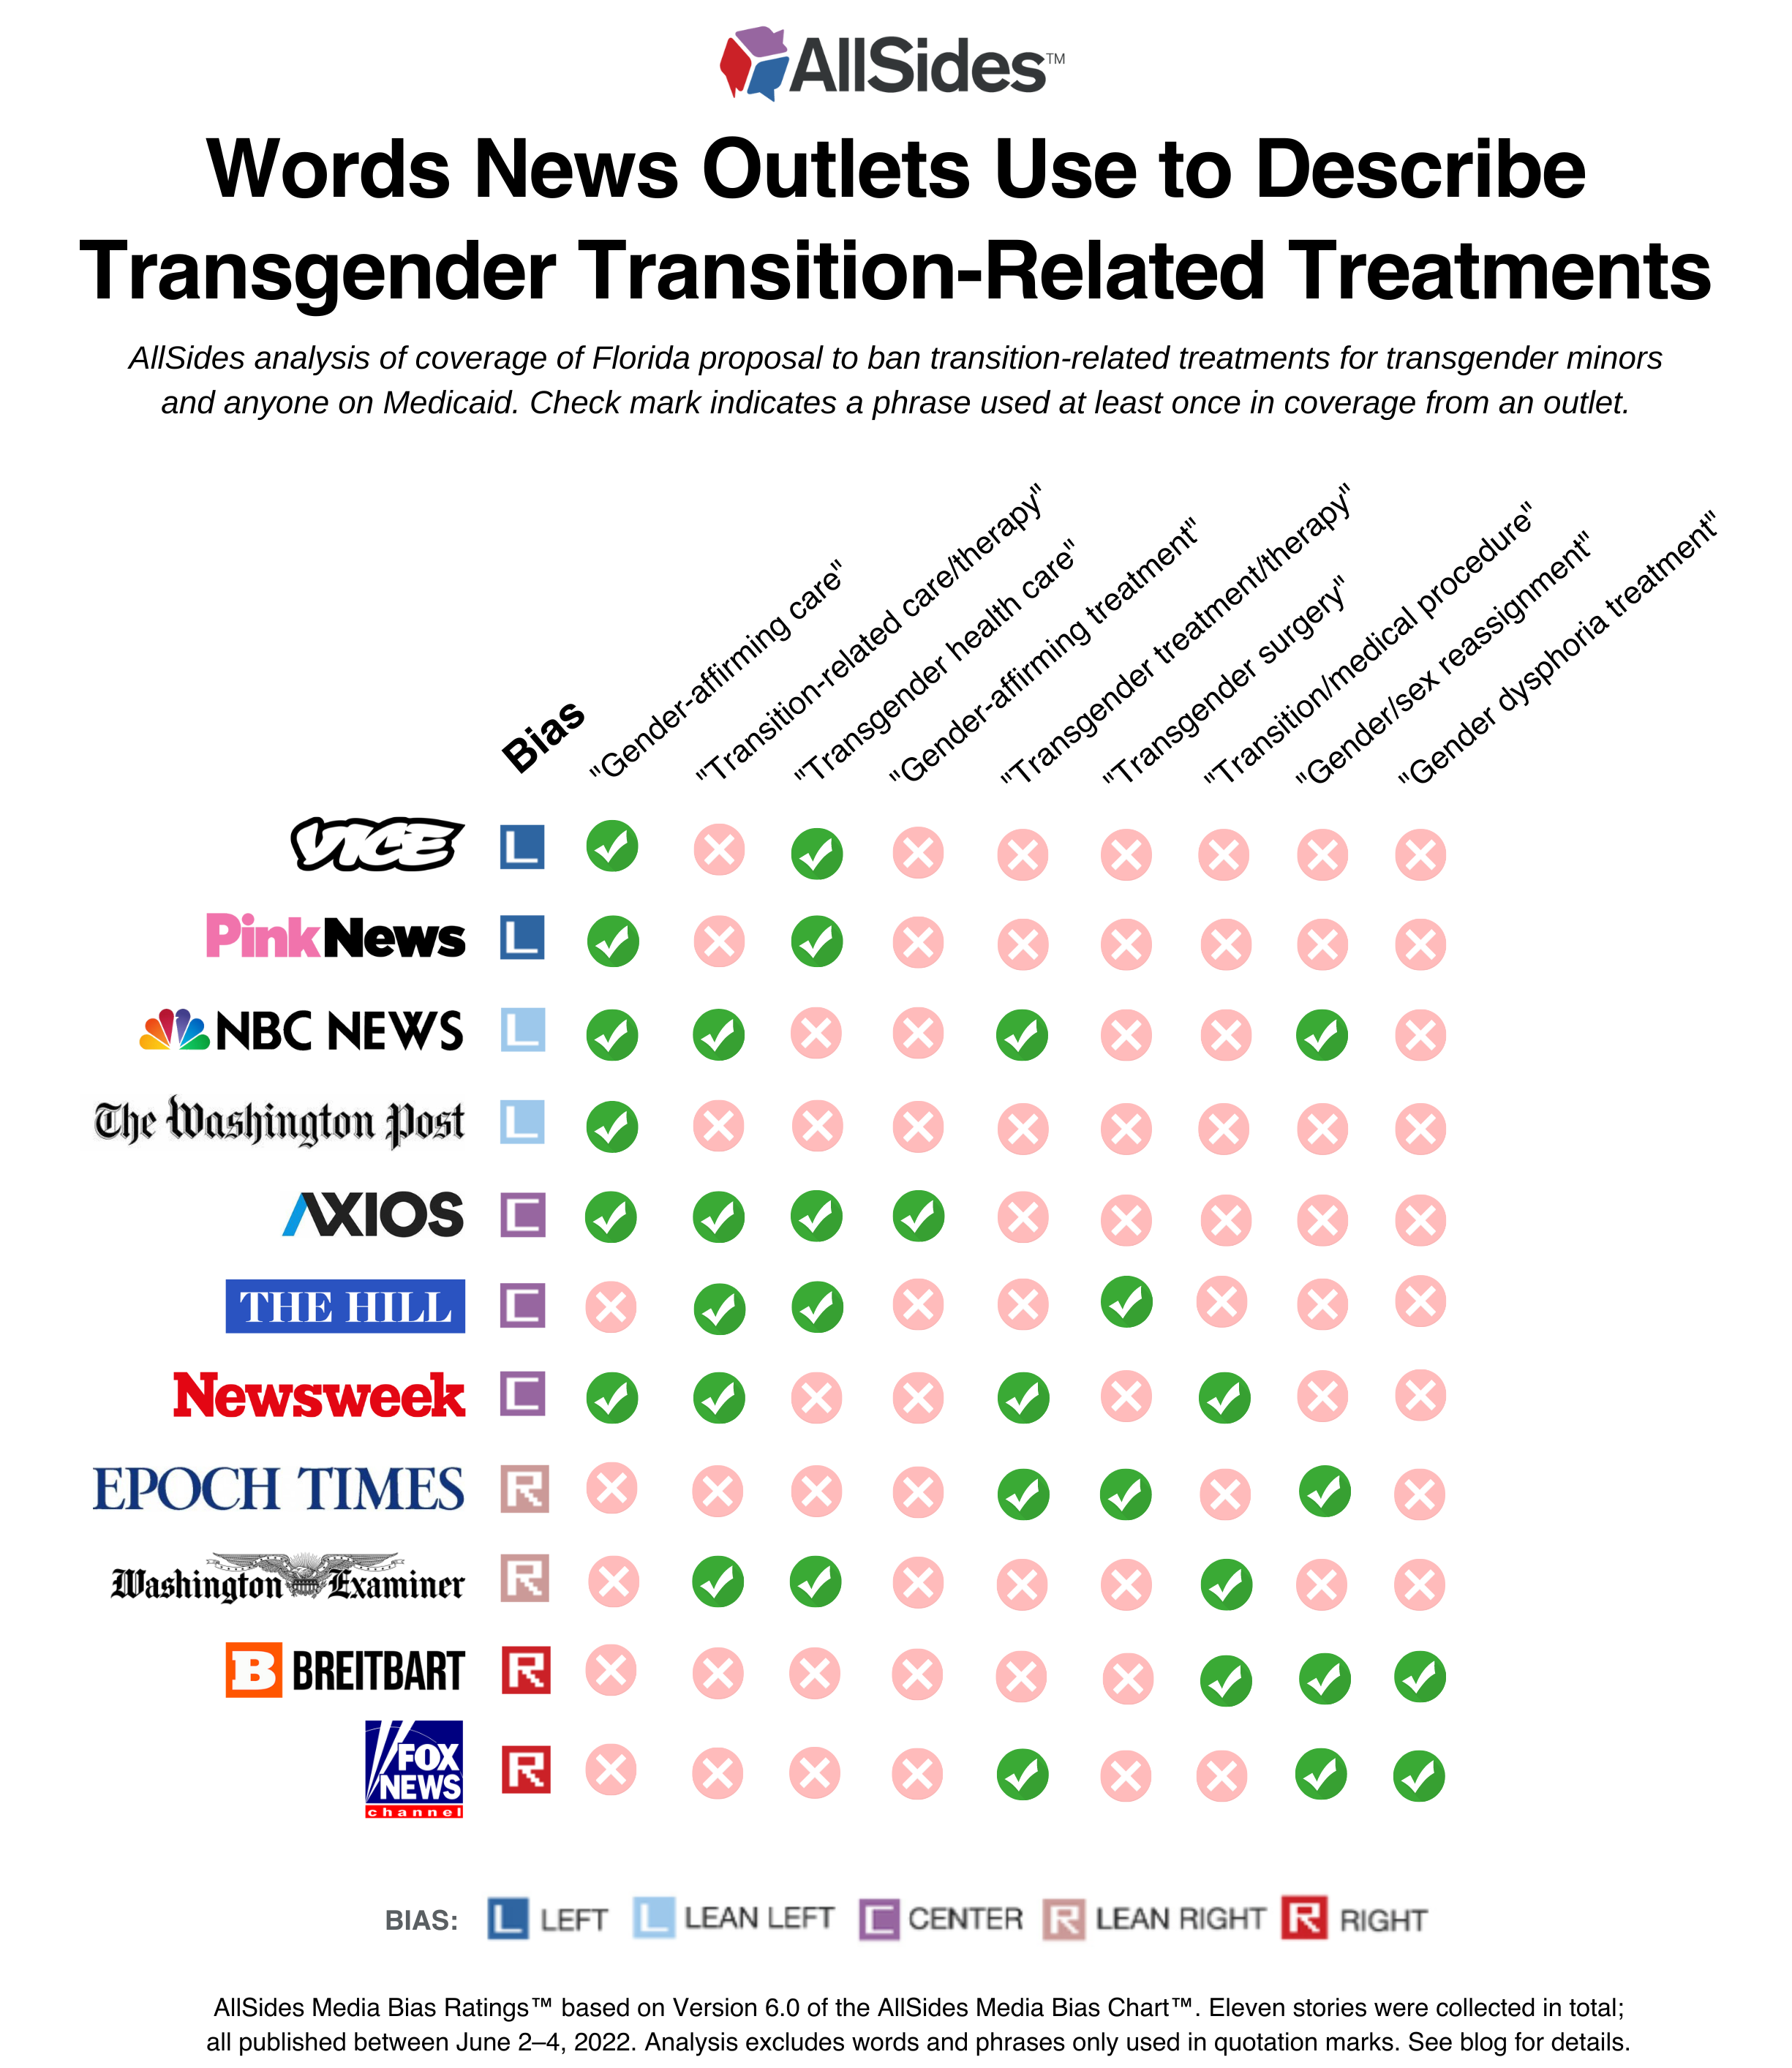 Words News Outlets Use to Describe Transgender Transition-Related Treatments